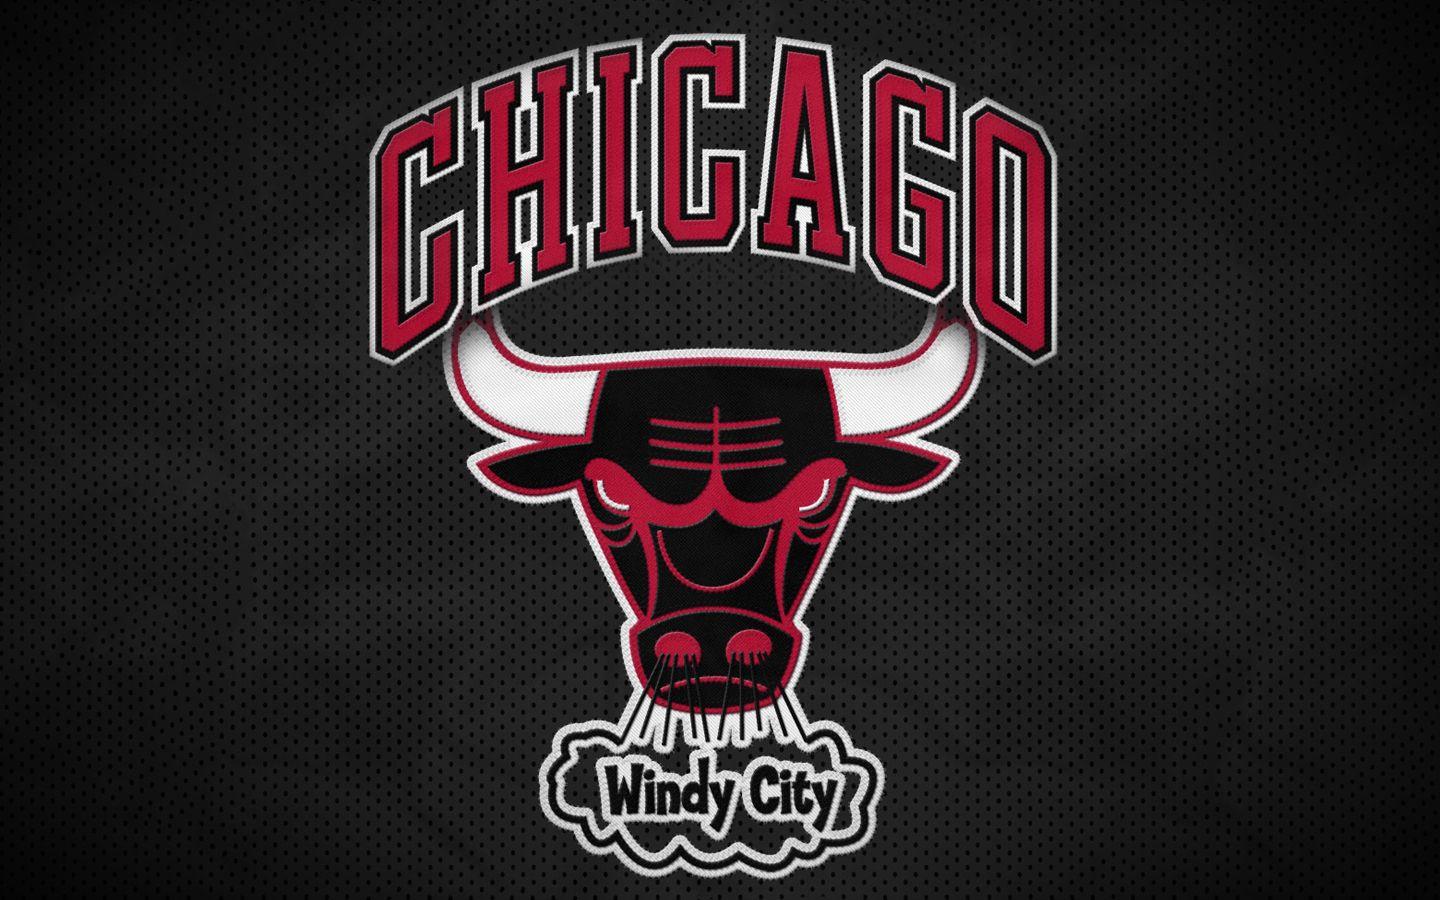 Chicago Bulls Cool Logo - Why Do Bulls Only Have One Flair On R Nba?